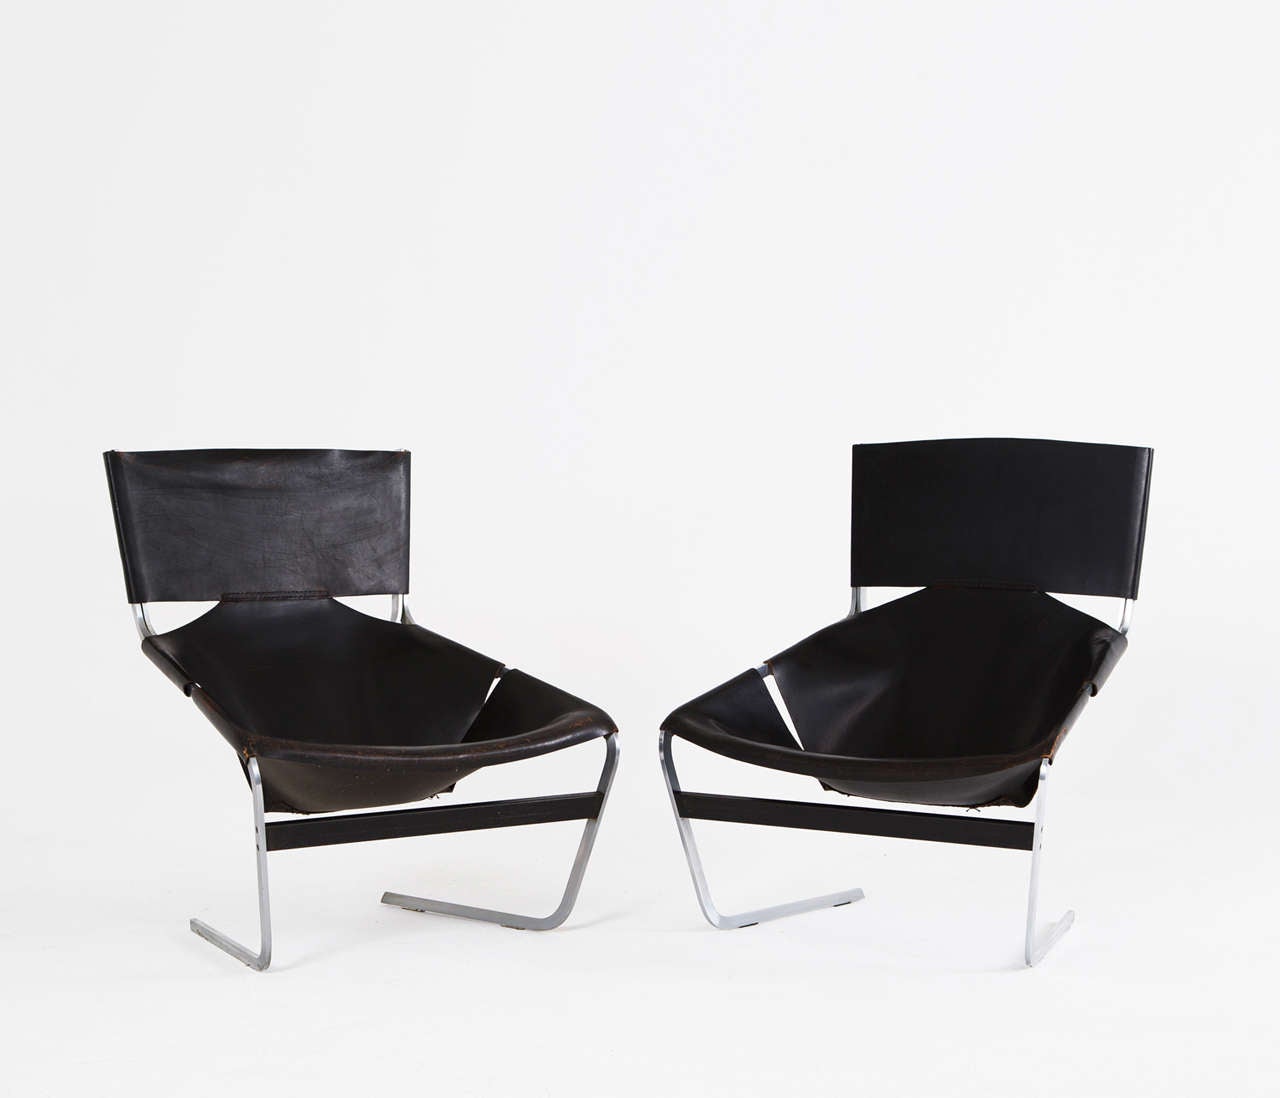 Stunning pair of beautifully patinated F-444 chairs designed by Pierre Paulin for Artifort, 1963. The chairs are in excellent condition and still provide with their original leather, which is hard to come by these days.

The chars show very